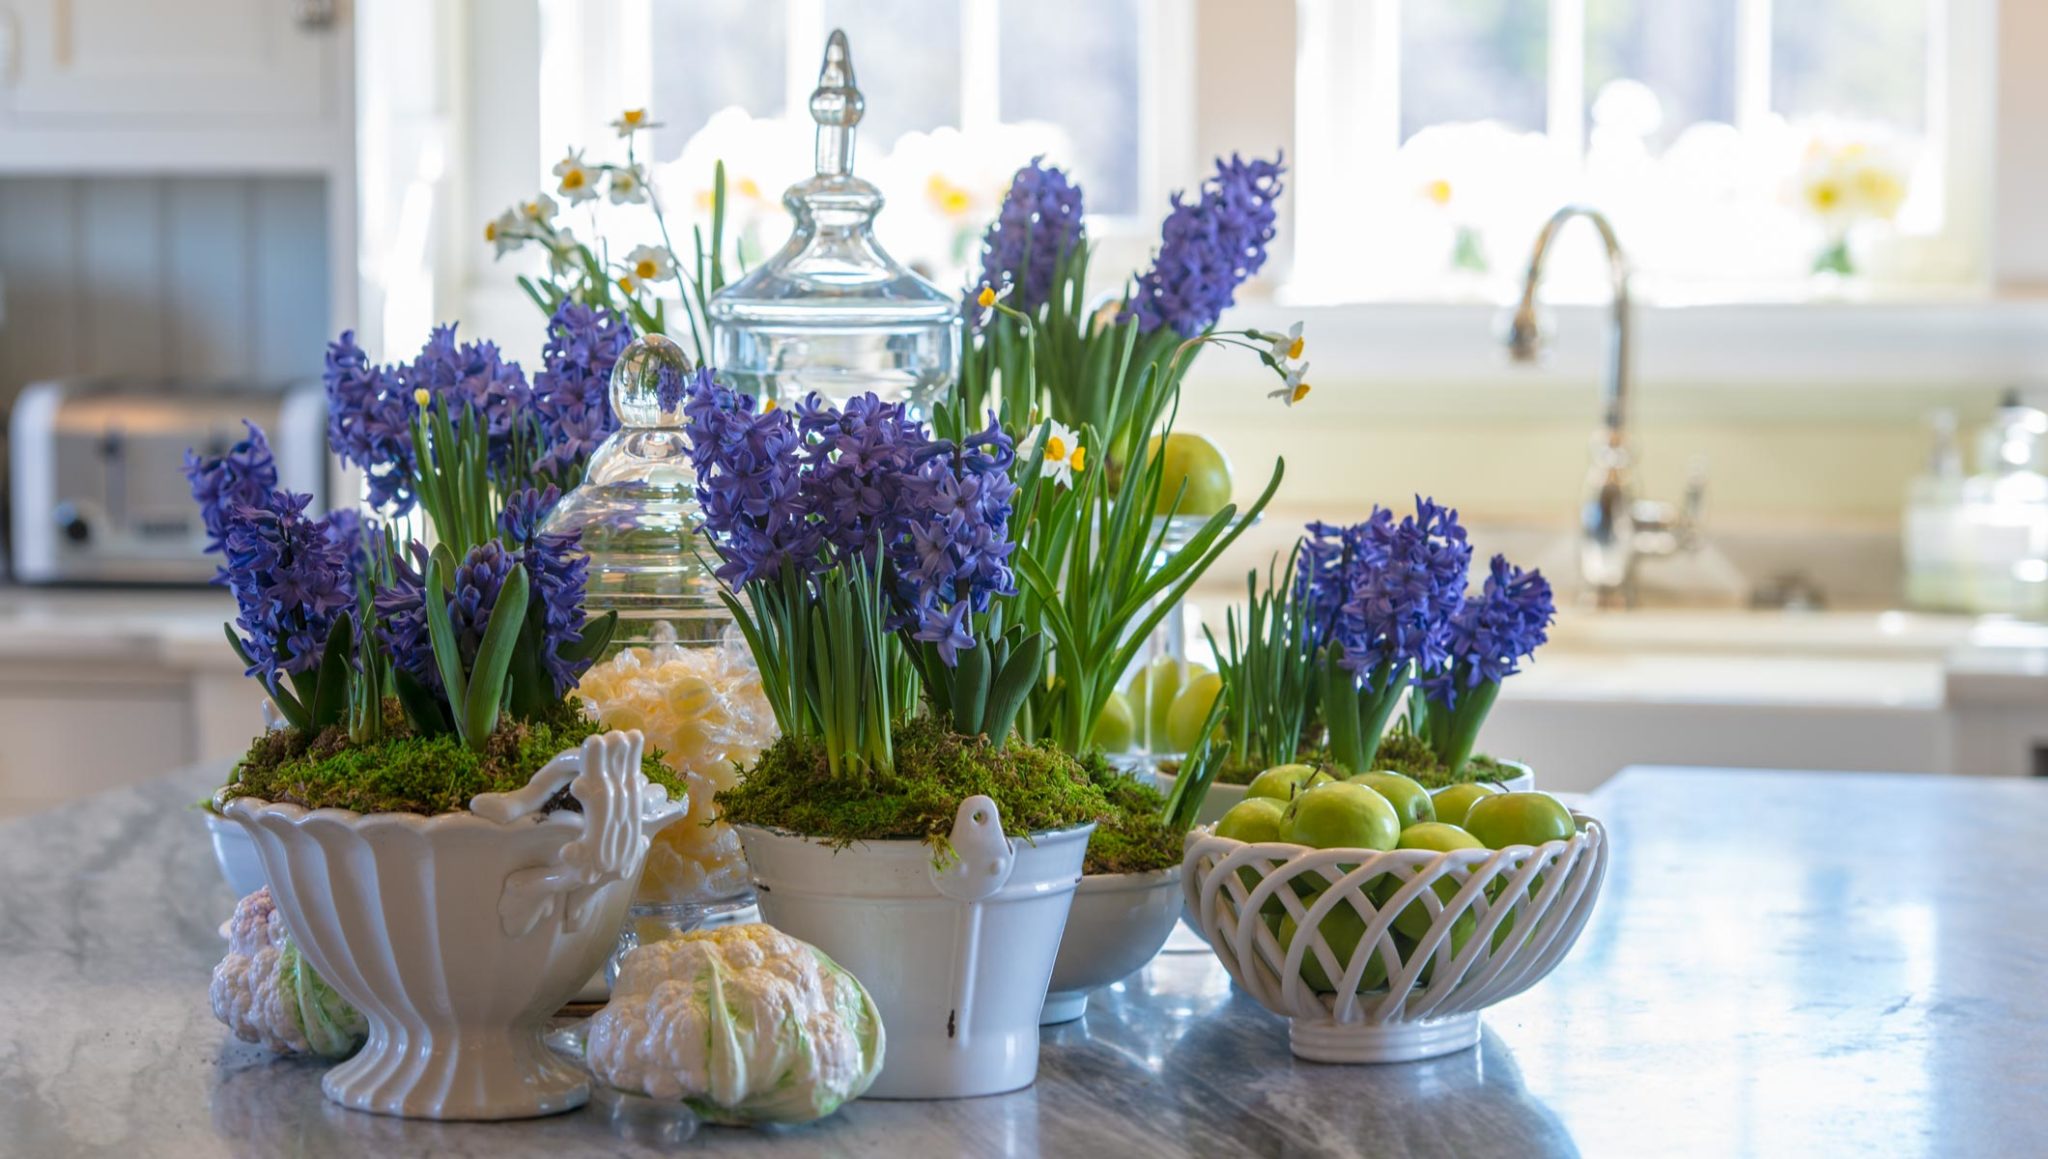 Indoor hyacinth planting instructions